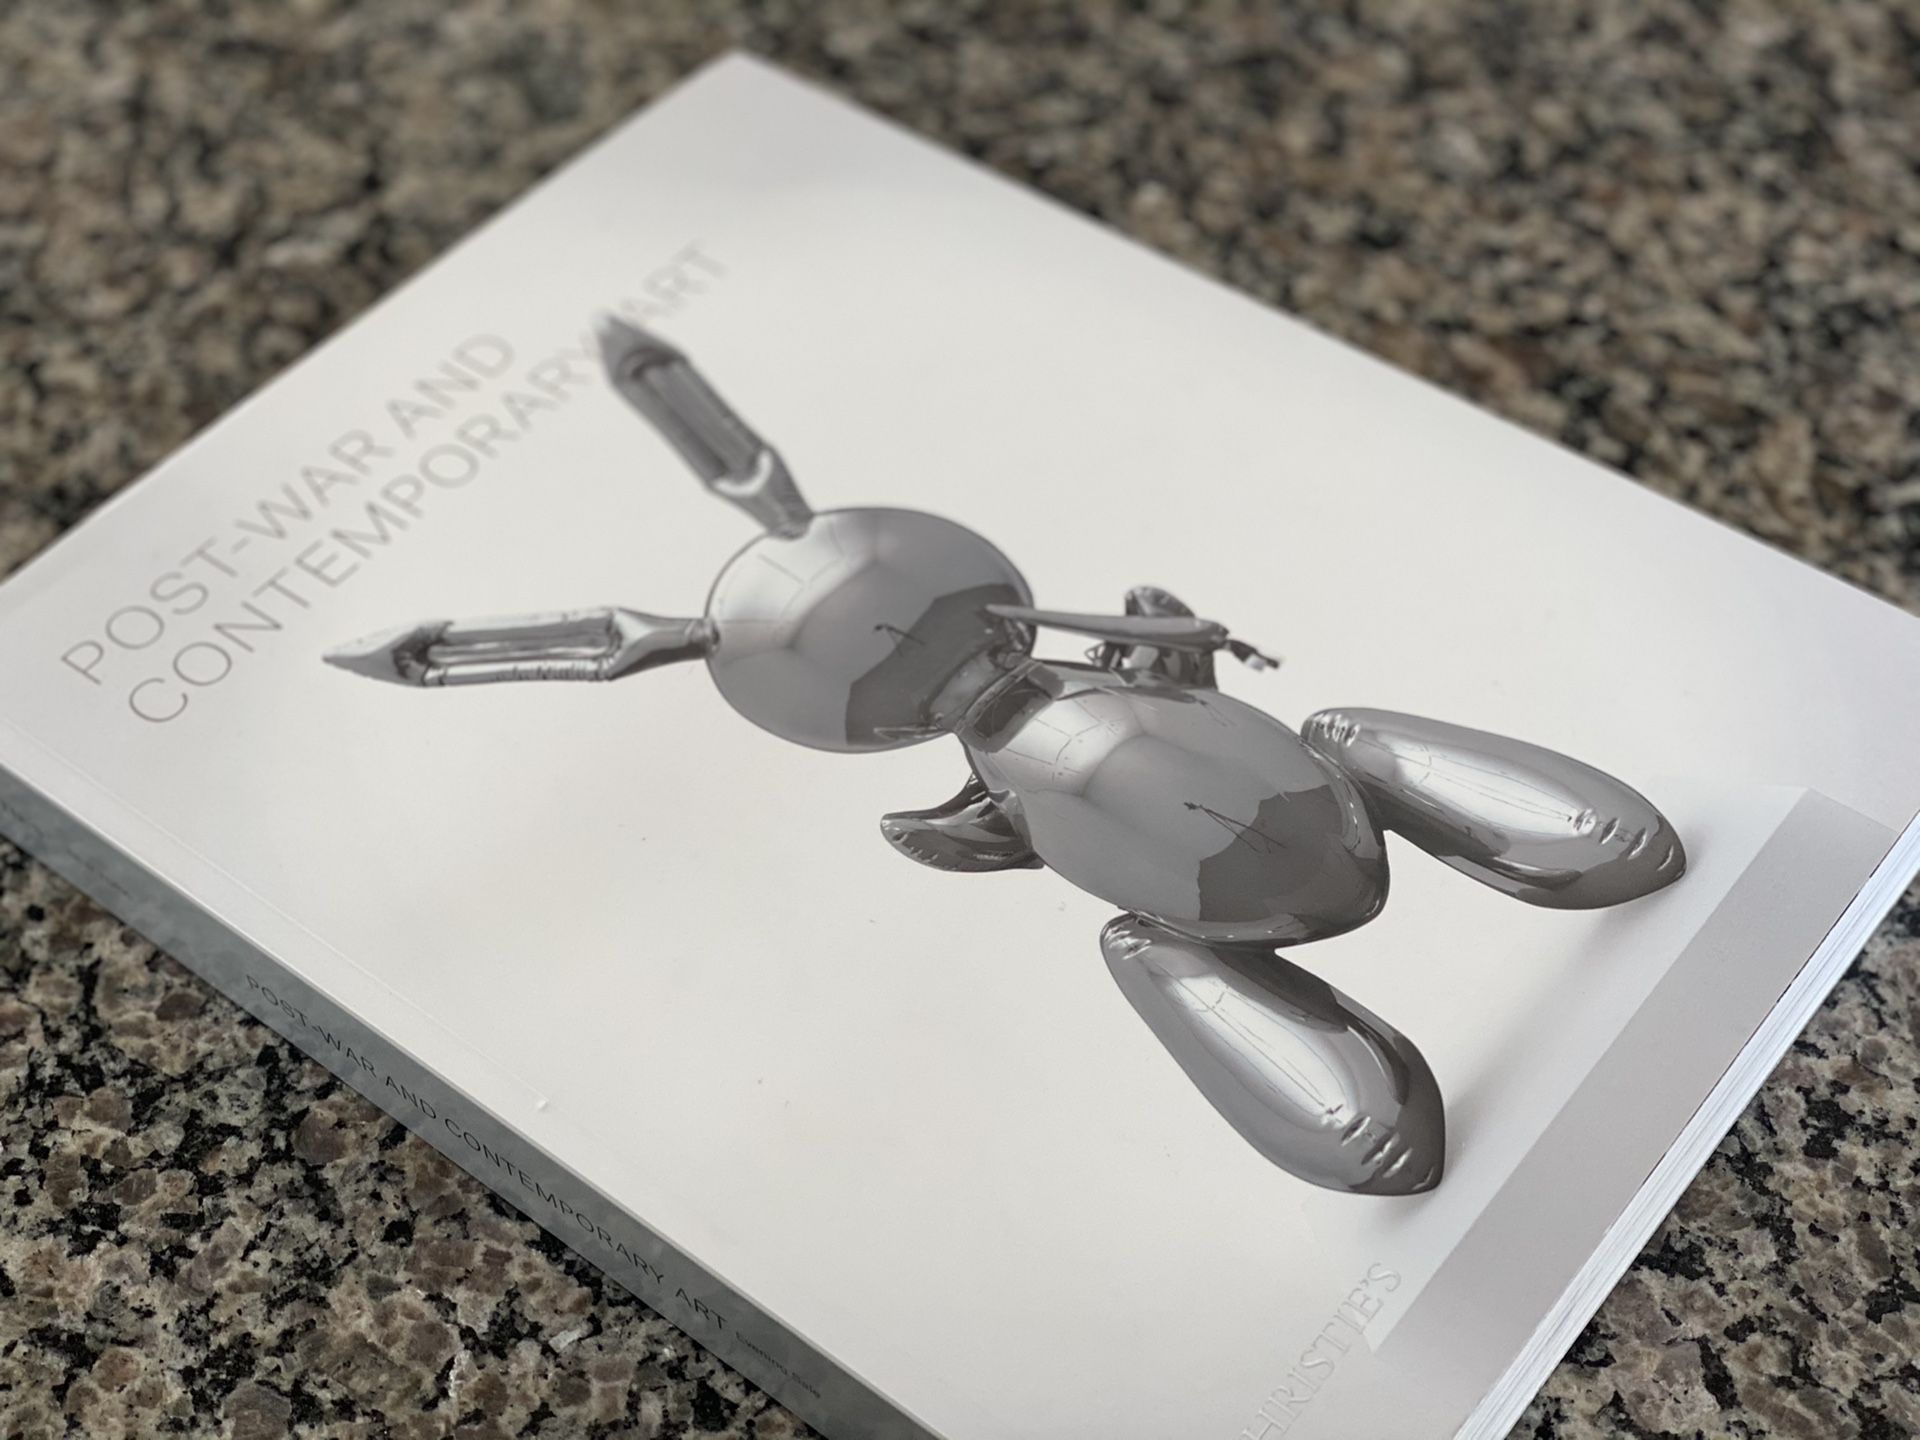 Christie’s Catalog of Post War and Contemporary Art 2019